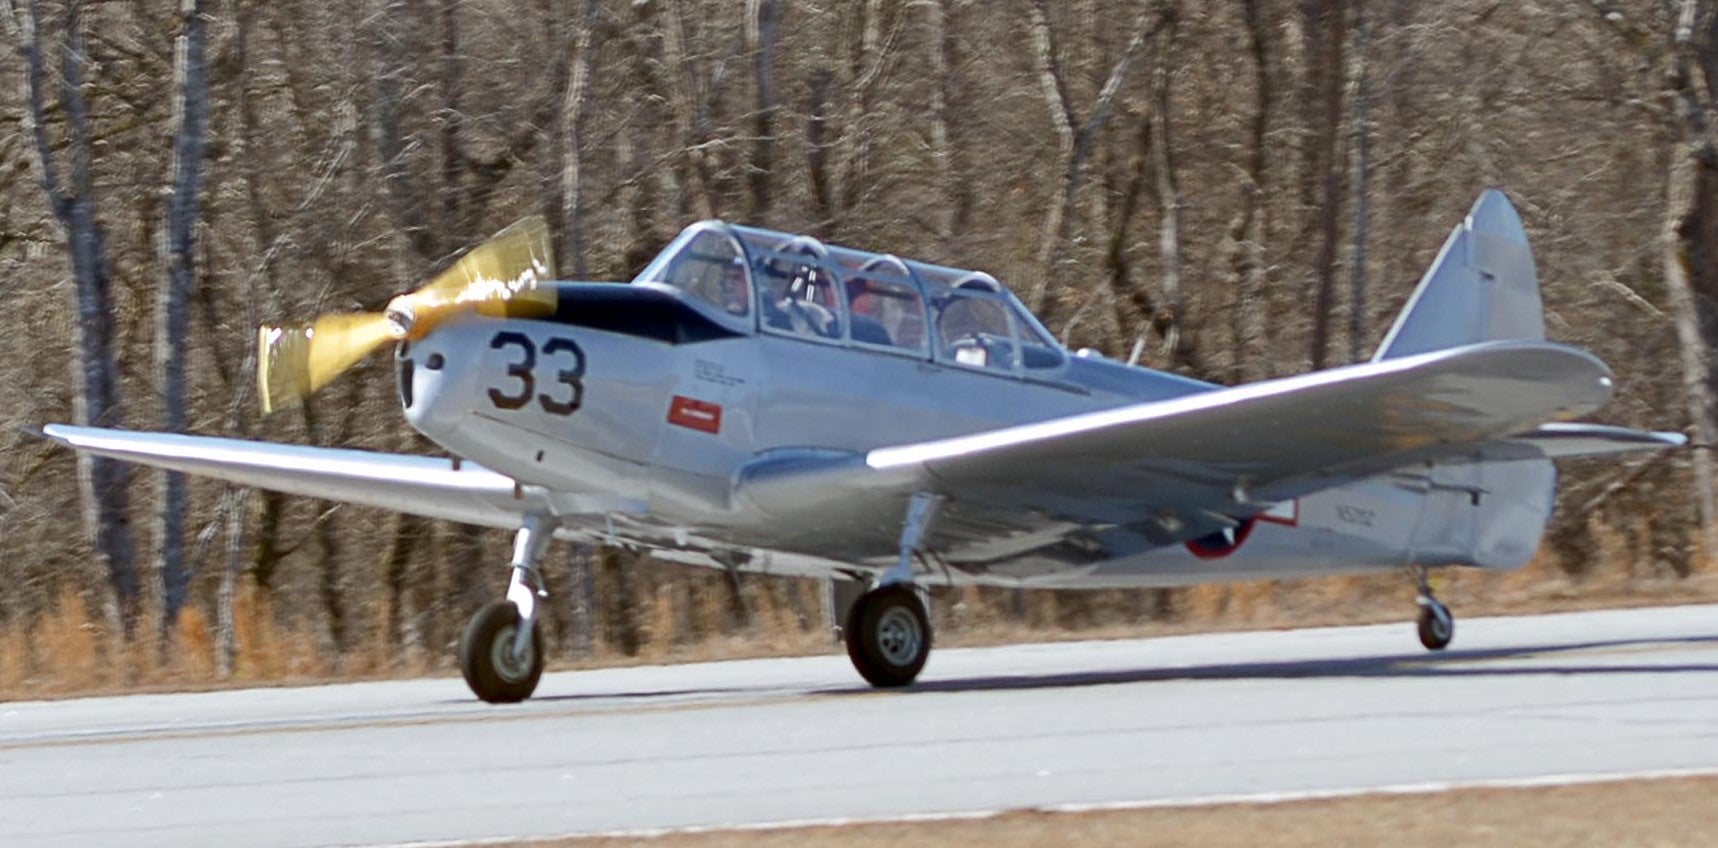 CAF Restores Classic PT-19A Trainer Used by Tuskegee Airmen